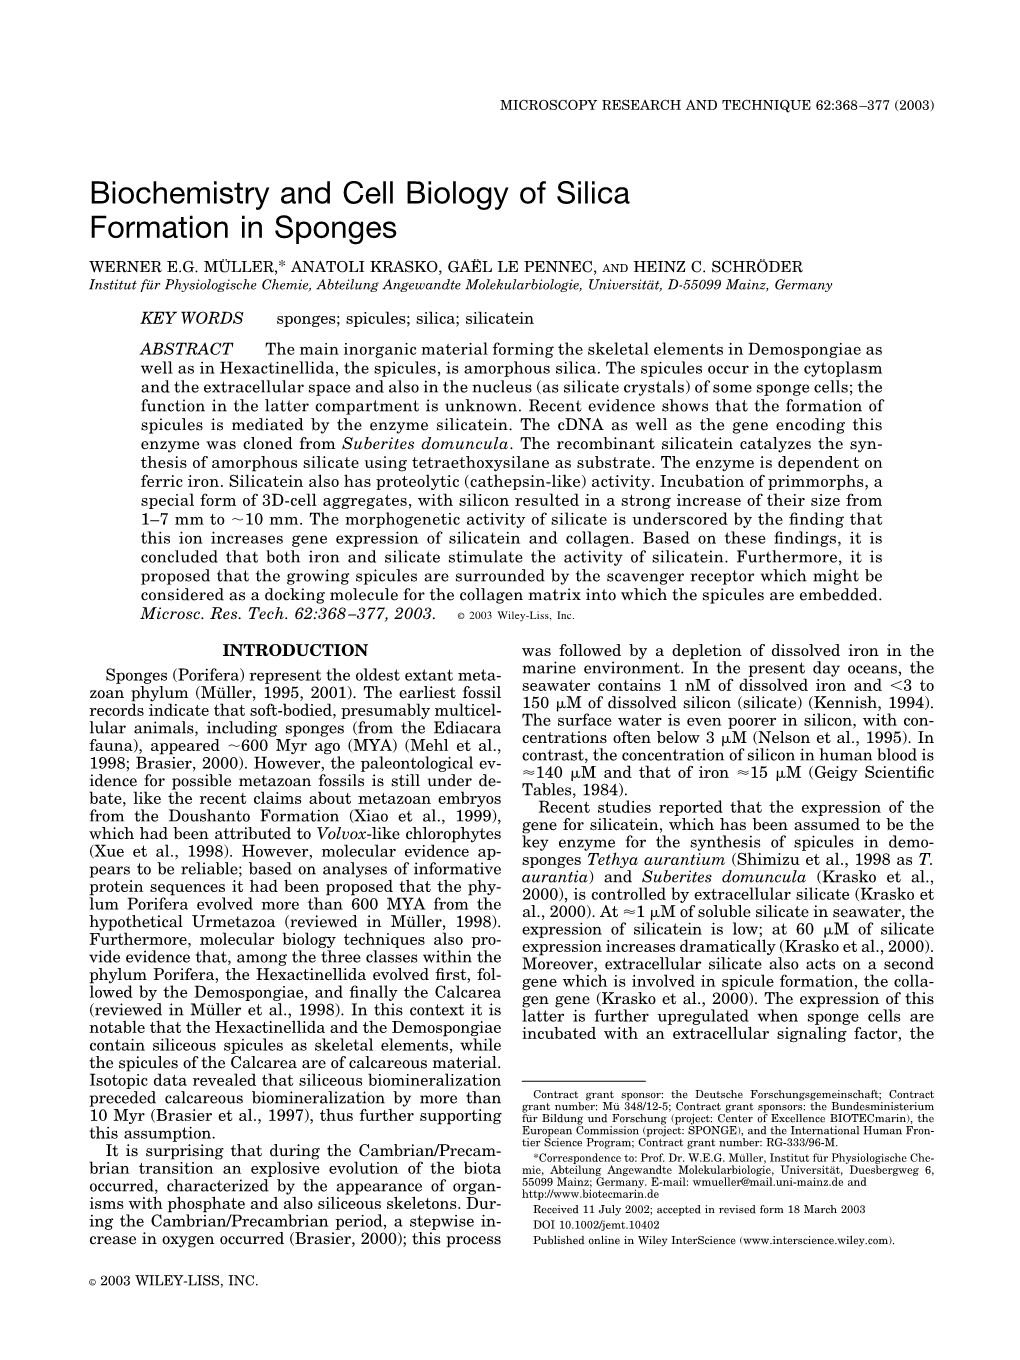 Biochemistry and Cell Biology of Silica Formation in Sponges